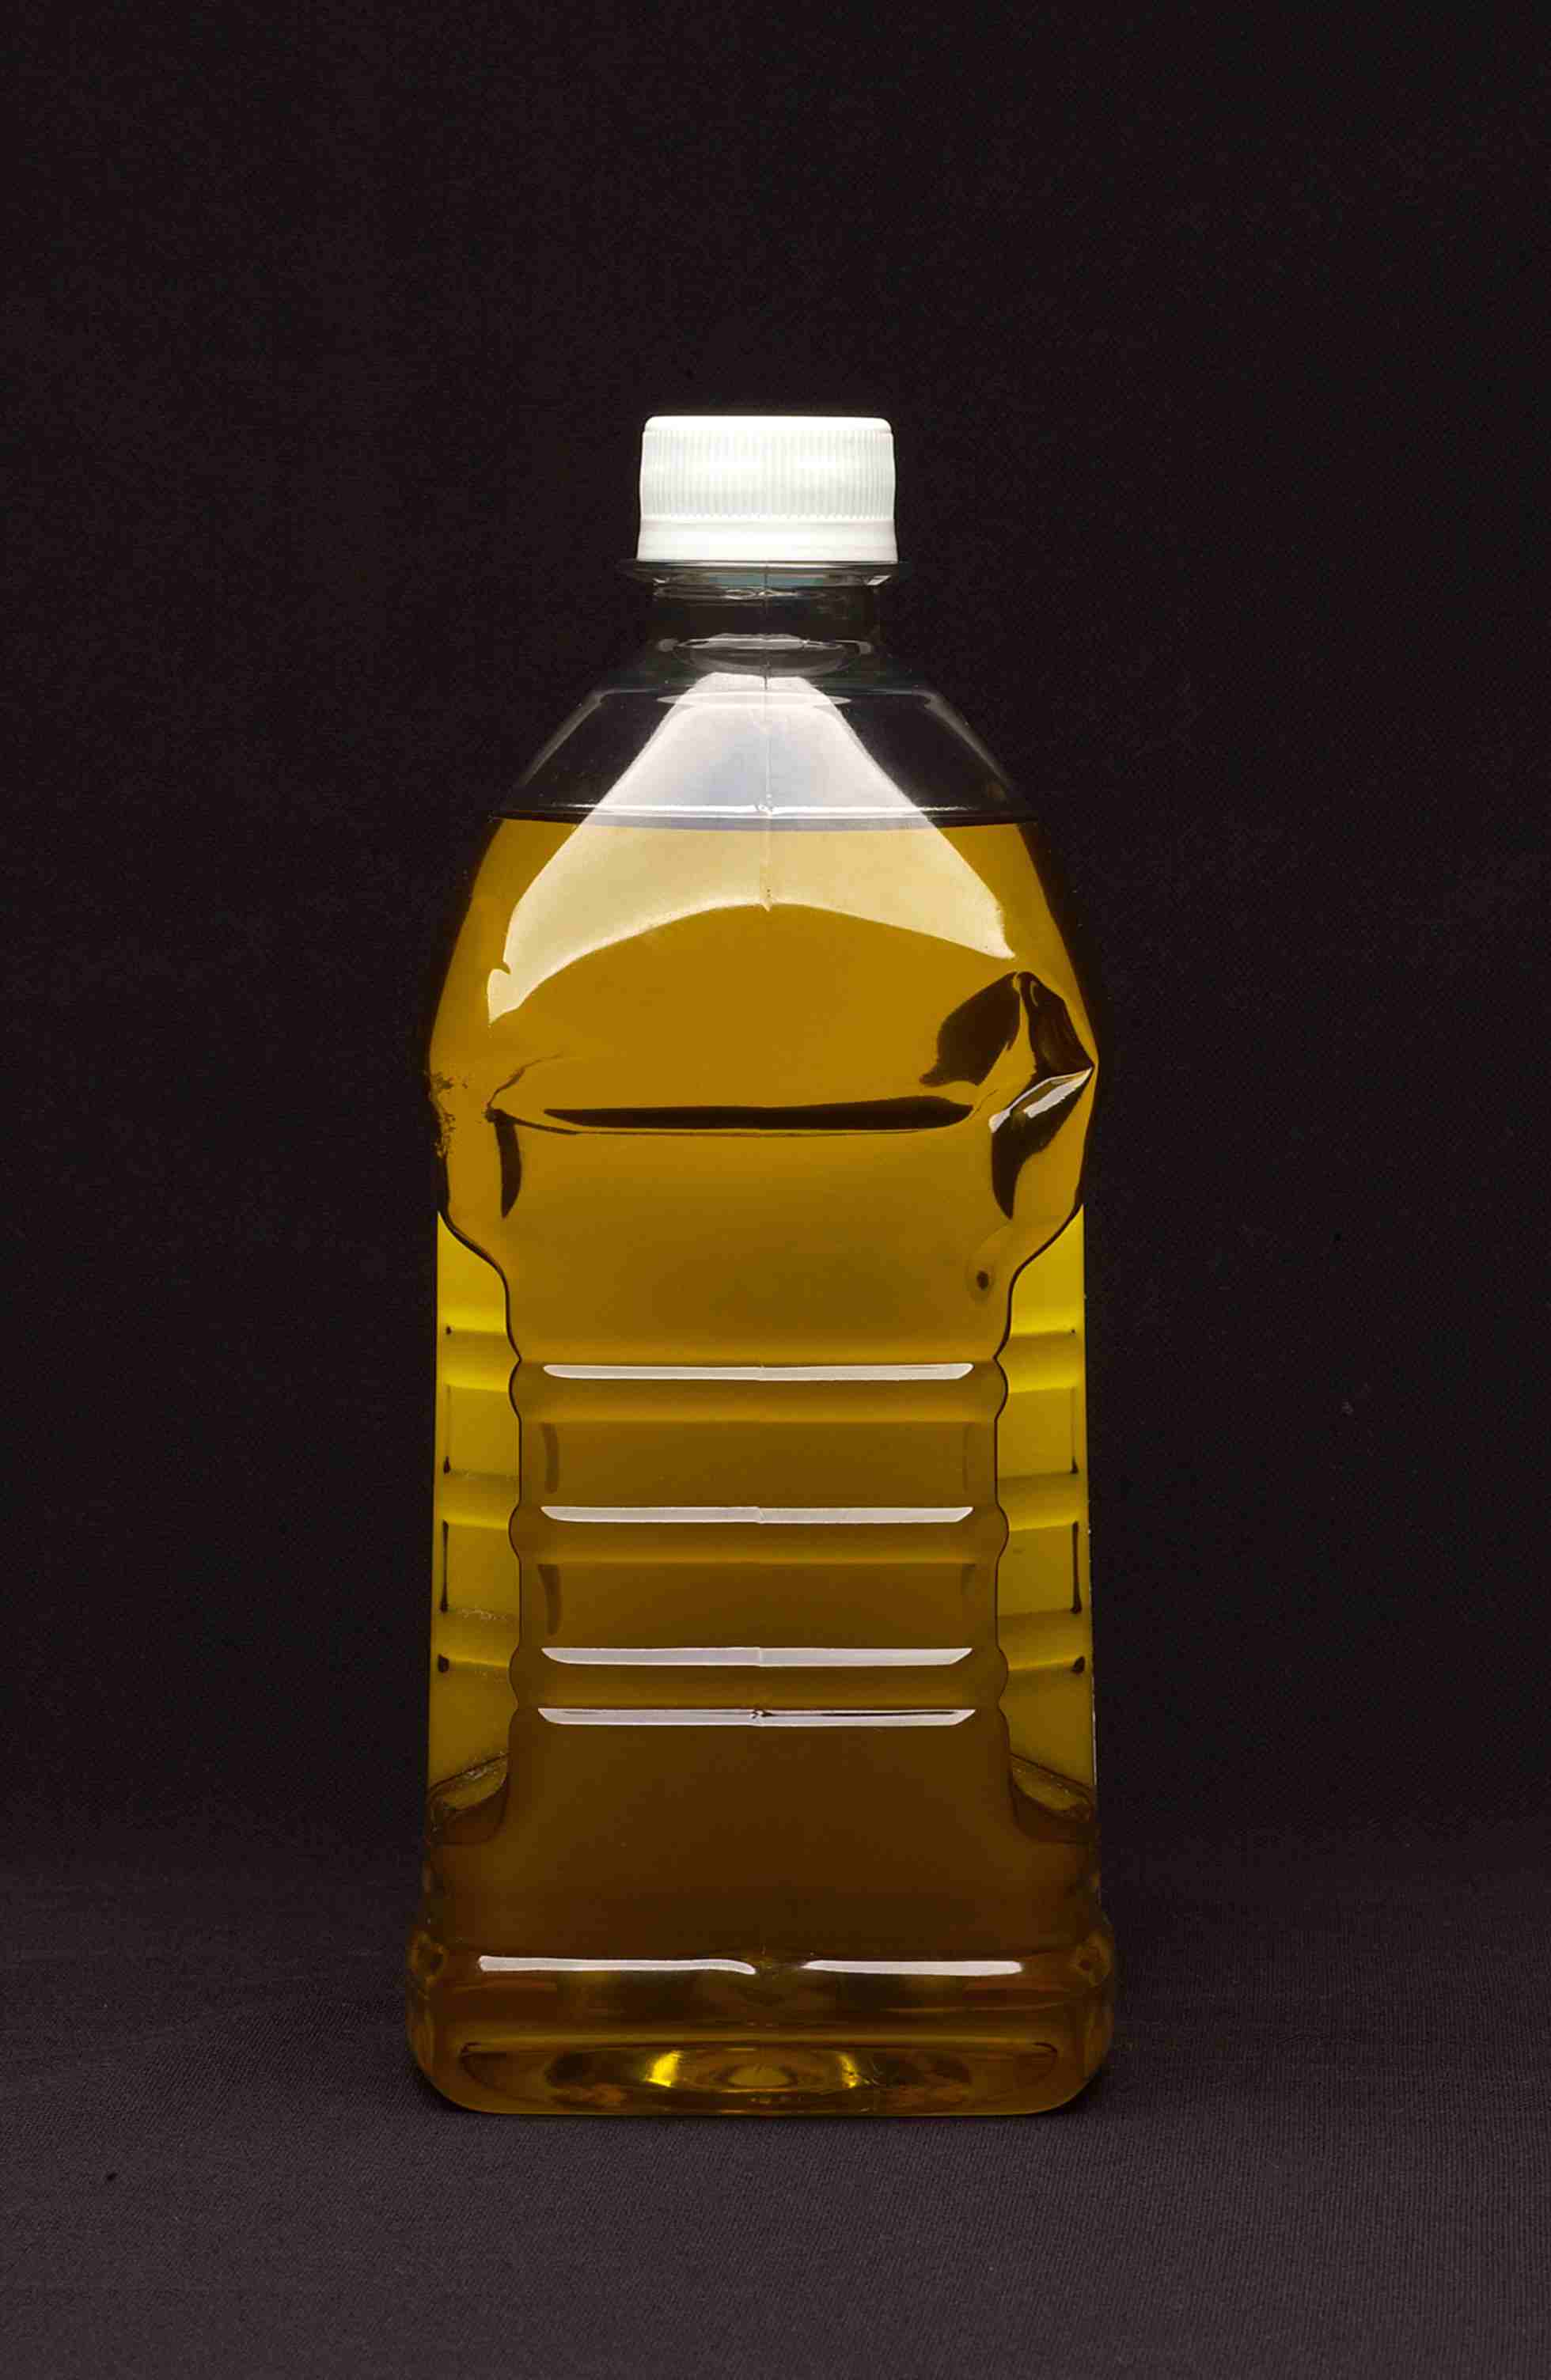 COTTON SEED OIL,COCONUT OIL,REFINED RAPESEED OIL,REFINED SOYBEANS OIL,REFINED SUNFLOWER OIL,REFINED CORN OIL